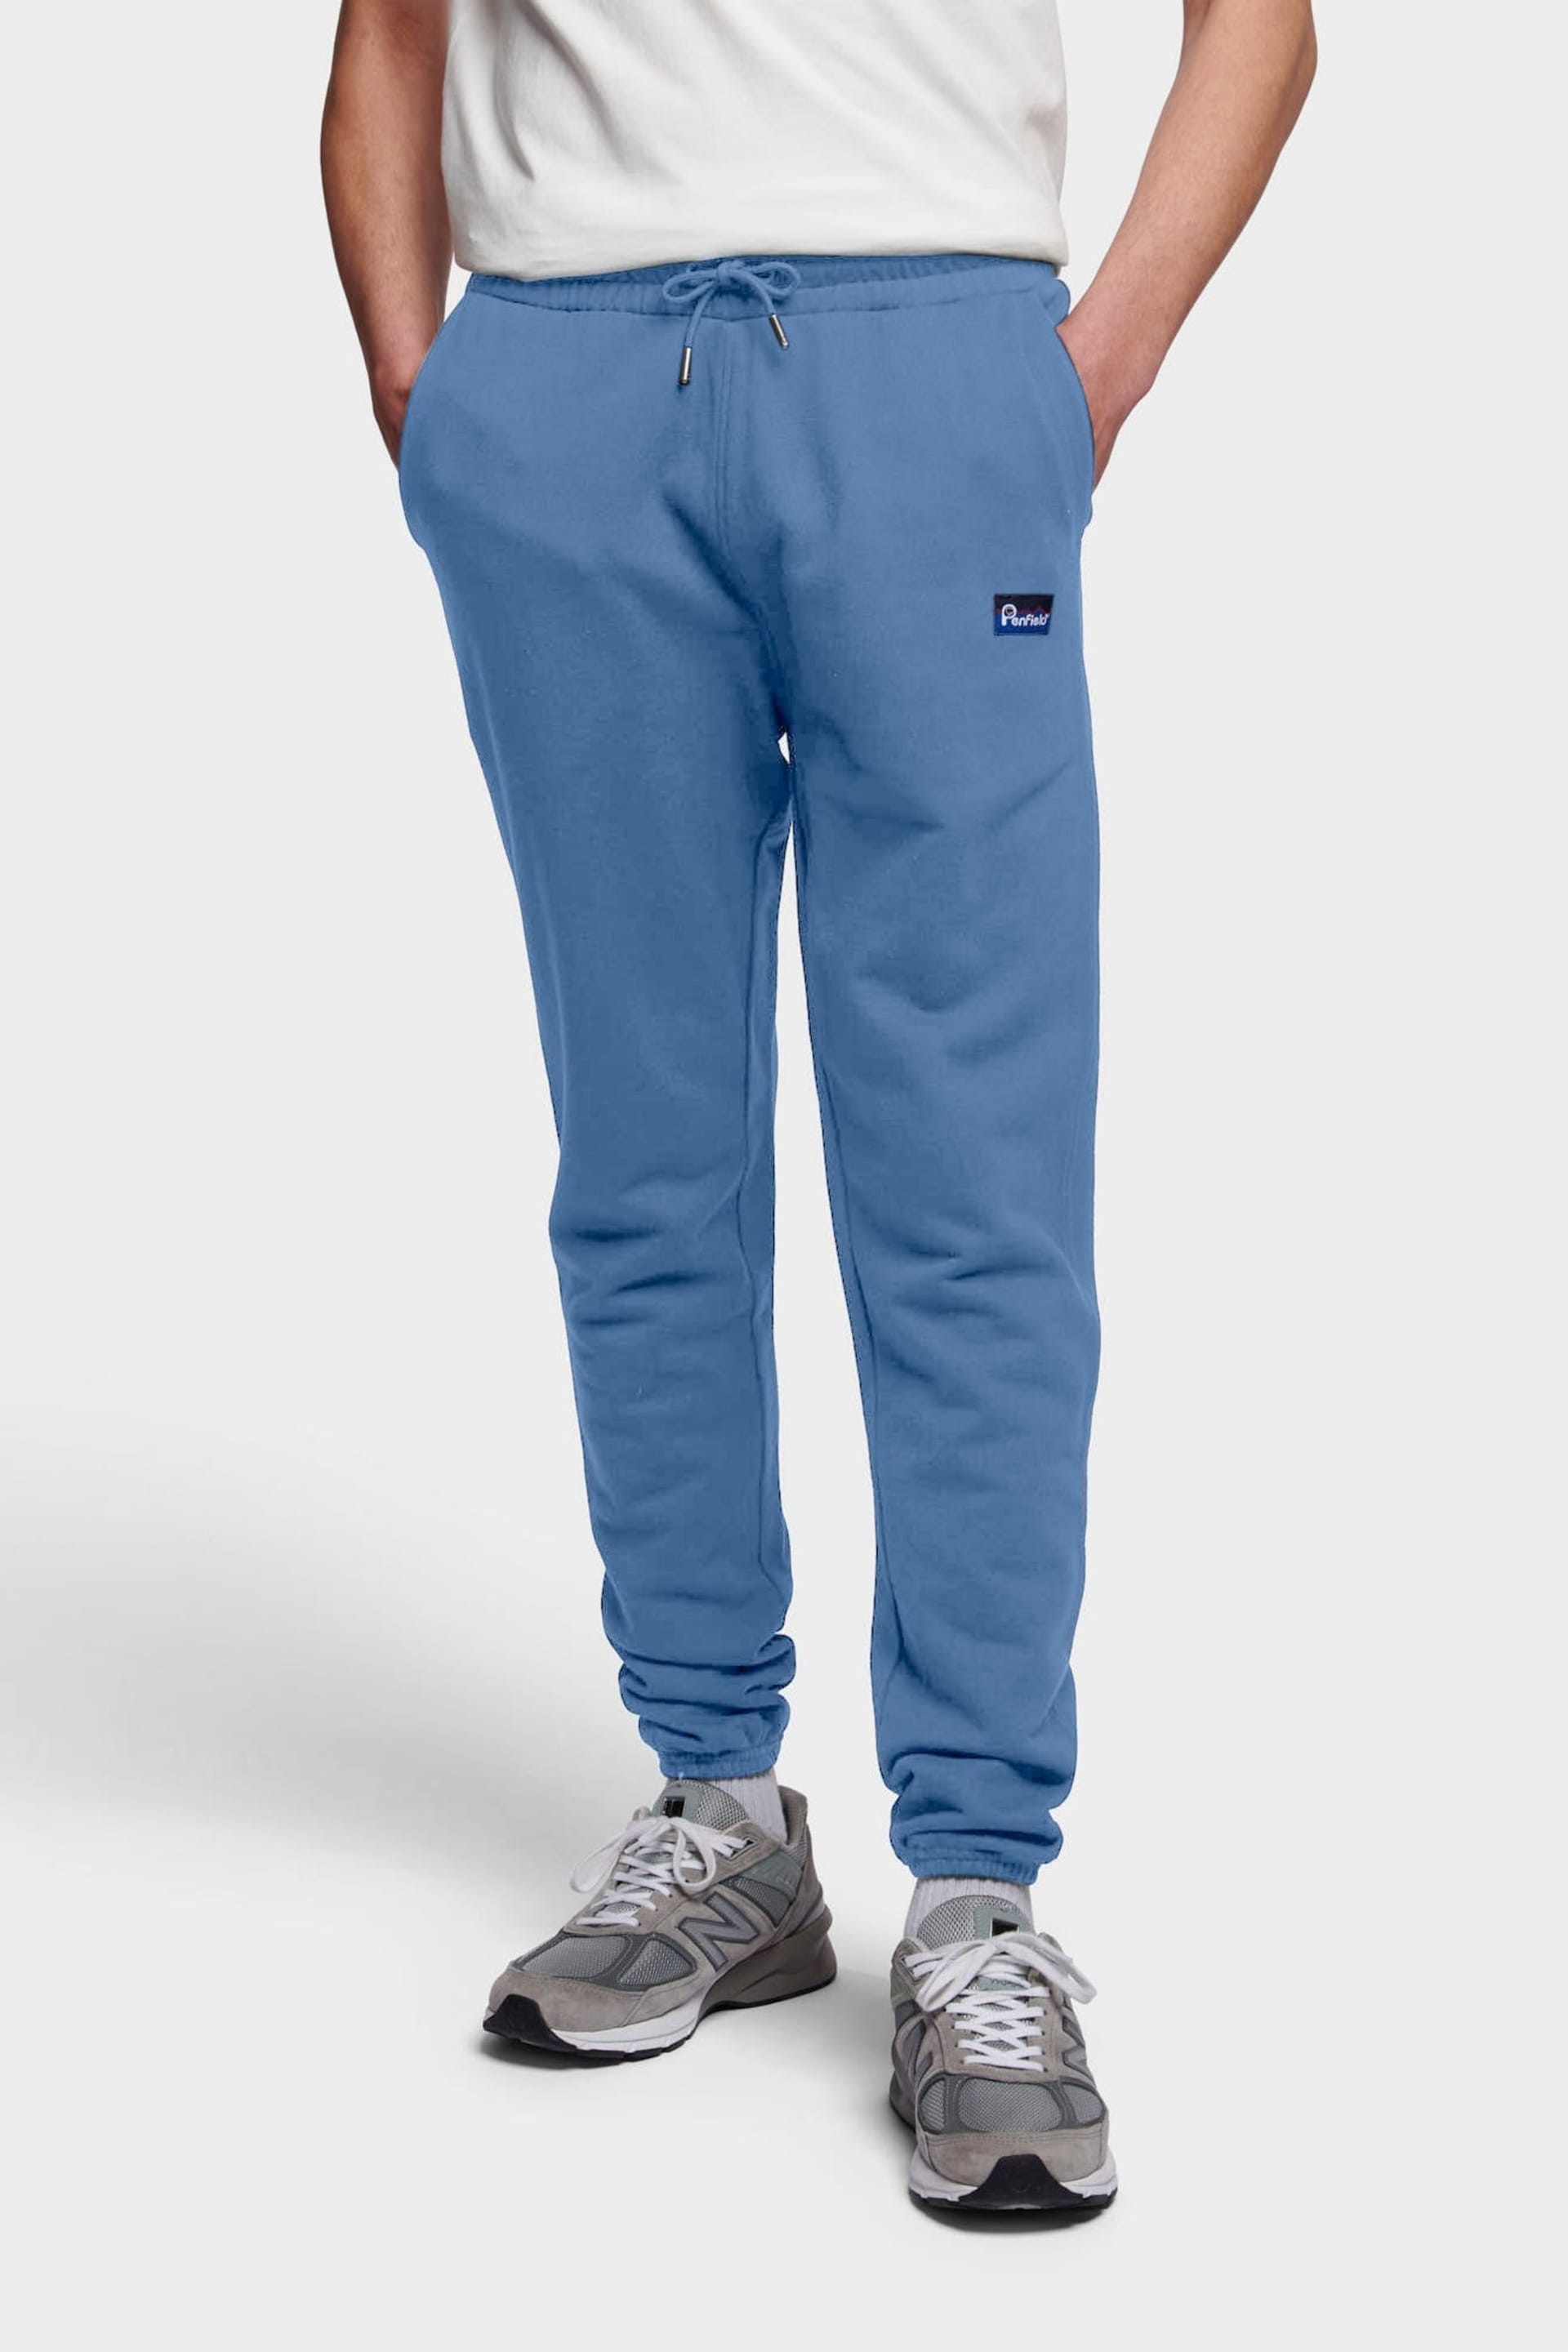 Penfield Mens Relaxed Fit Original Logo Joggers - Image 1 of 8